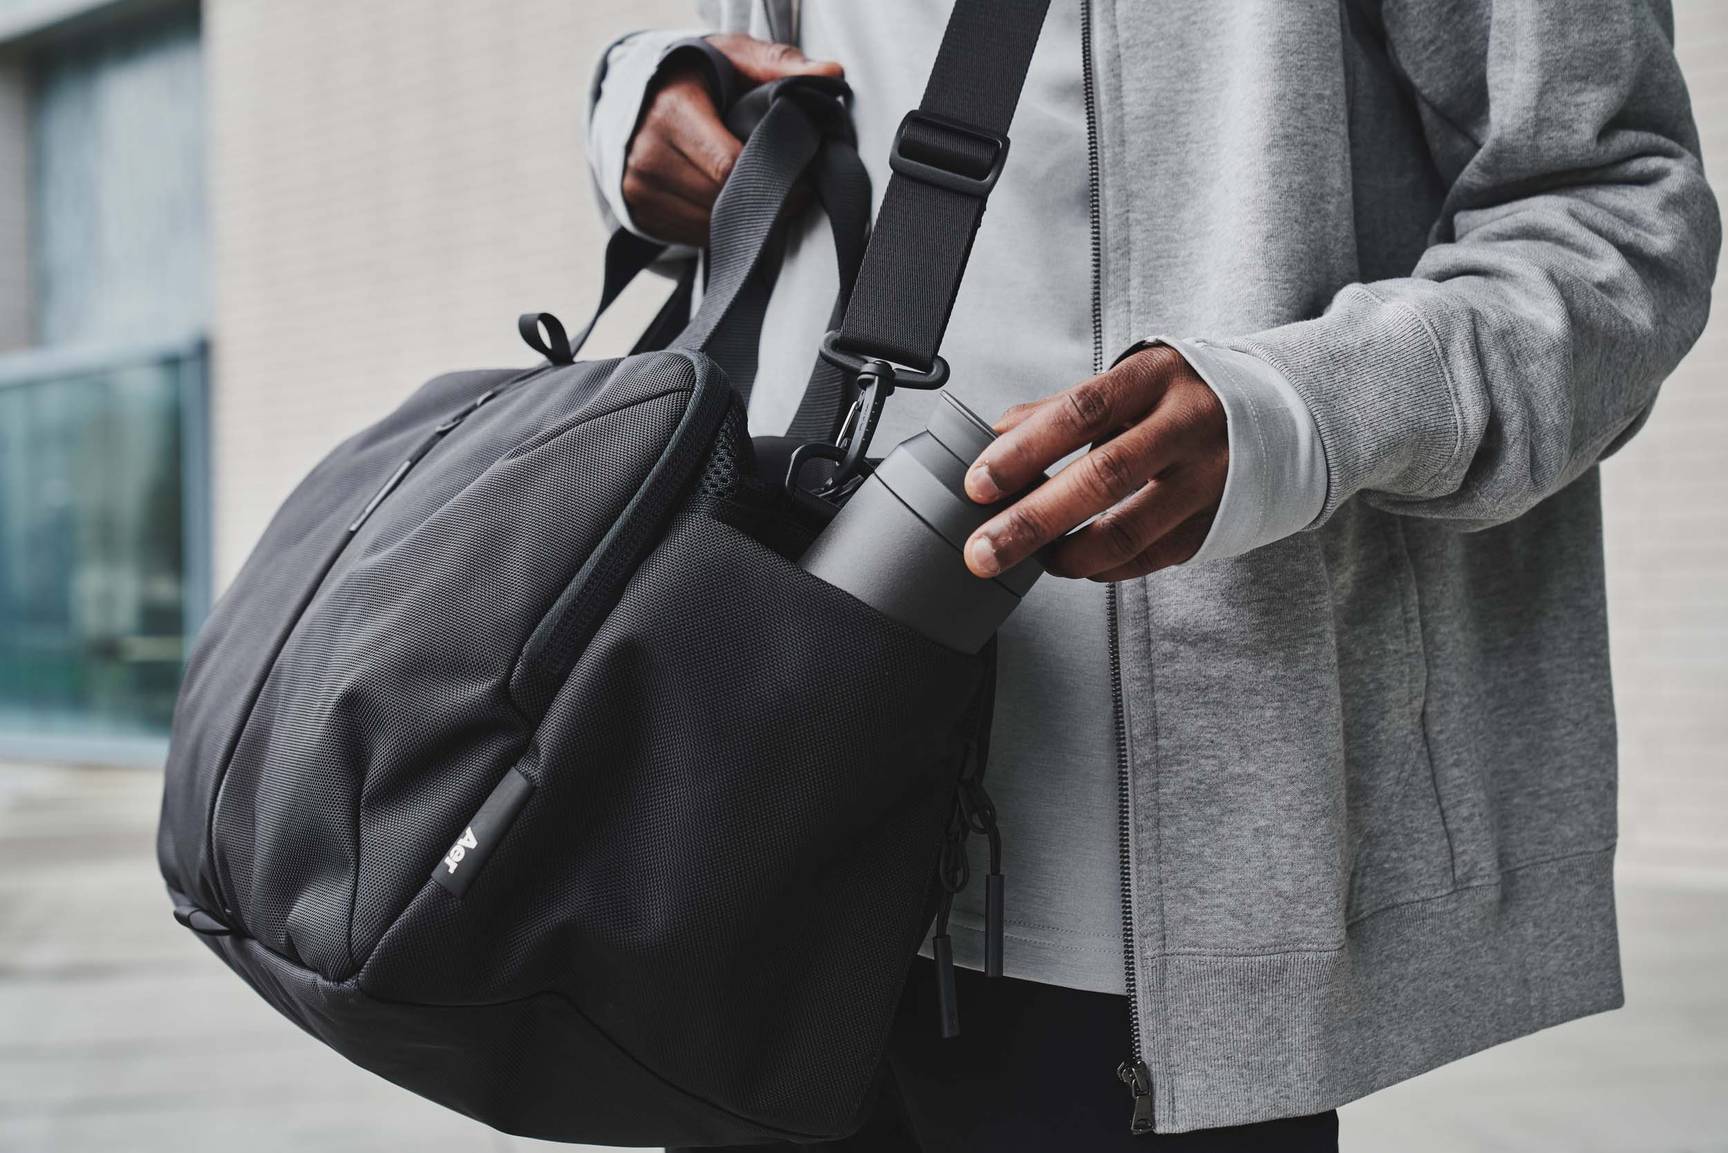 Aer Ventilated Gym Duffel Bag Hit the gym with everything you need